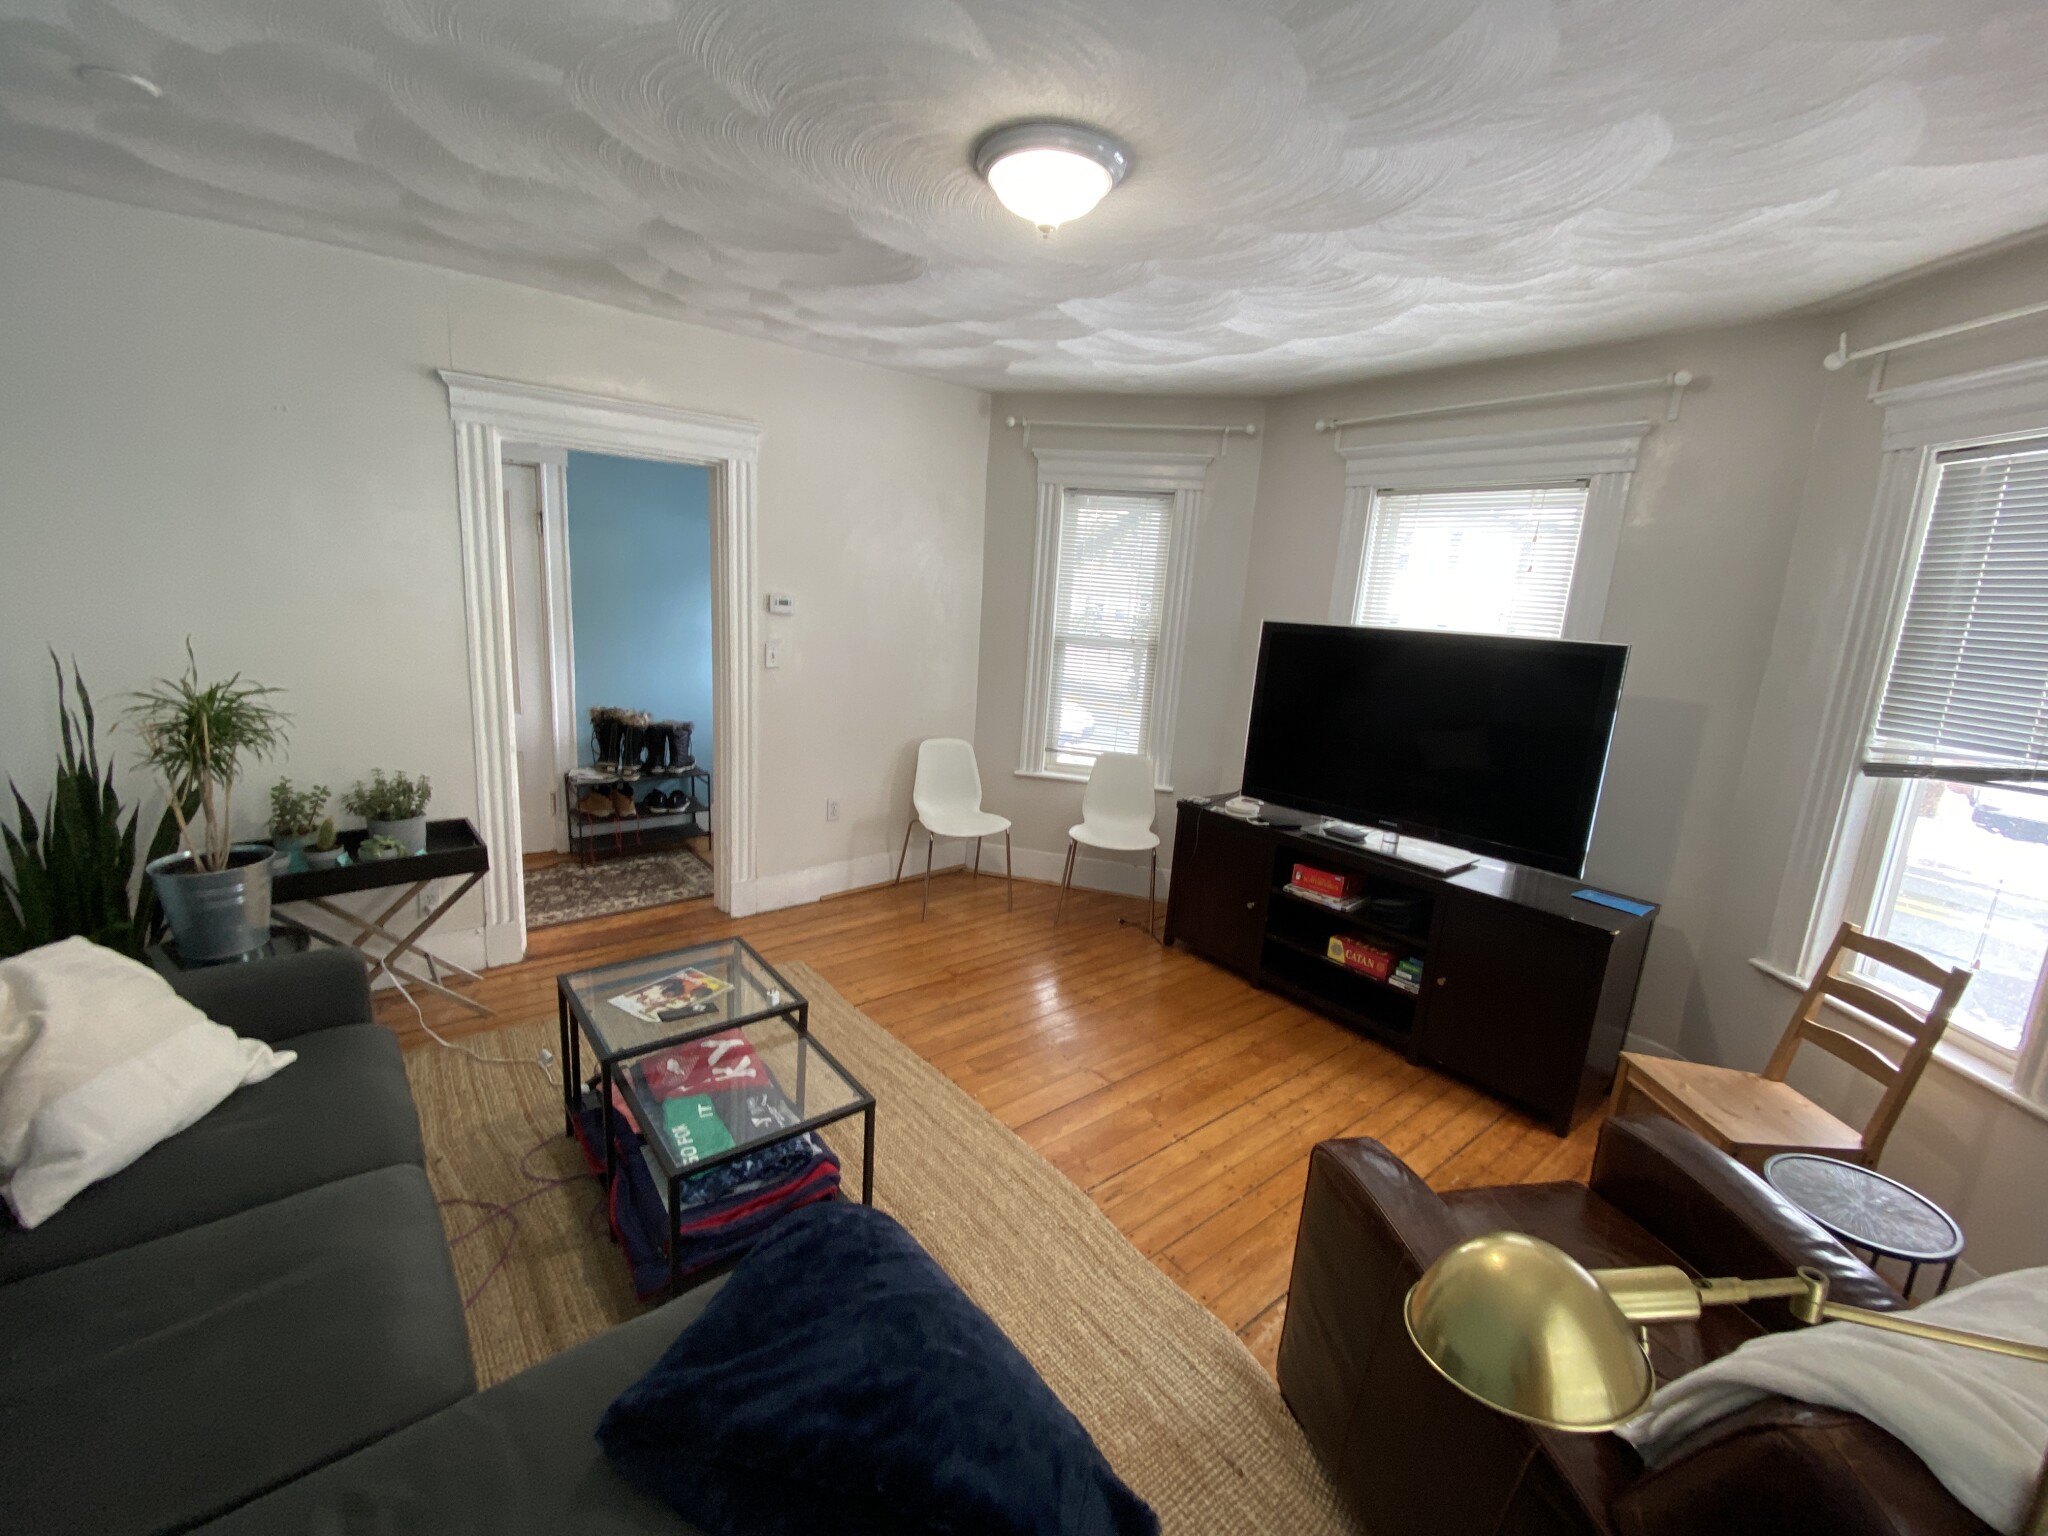 Photos of apartment on Holyoke Rd.,Somerville MA 02144